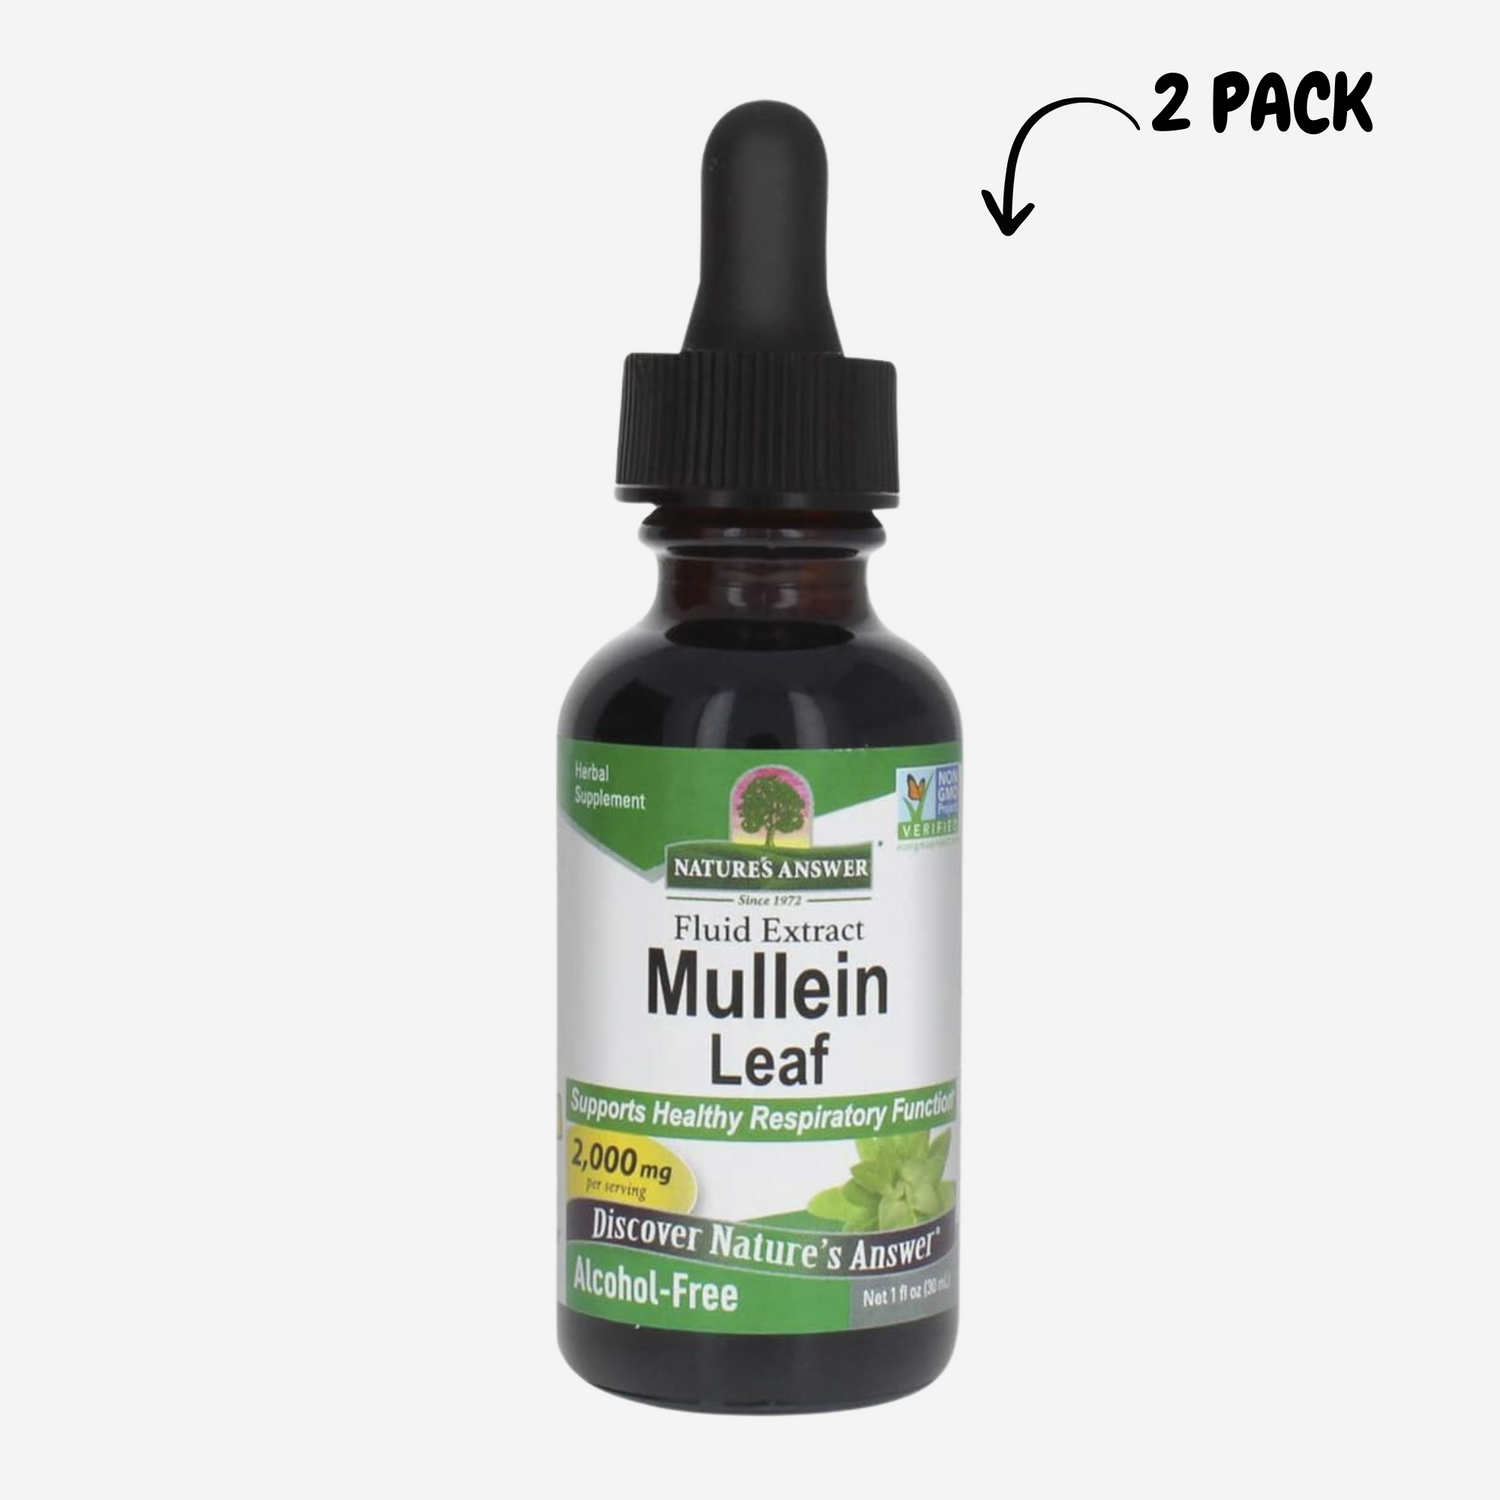 Nature's Answer Mullein Leaf | Herbal Supplement | Supports Respiratory Function & Mucous Membranes